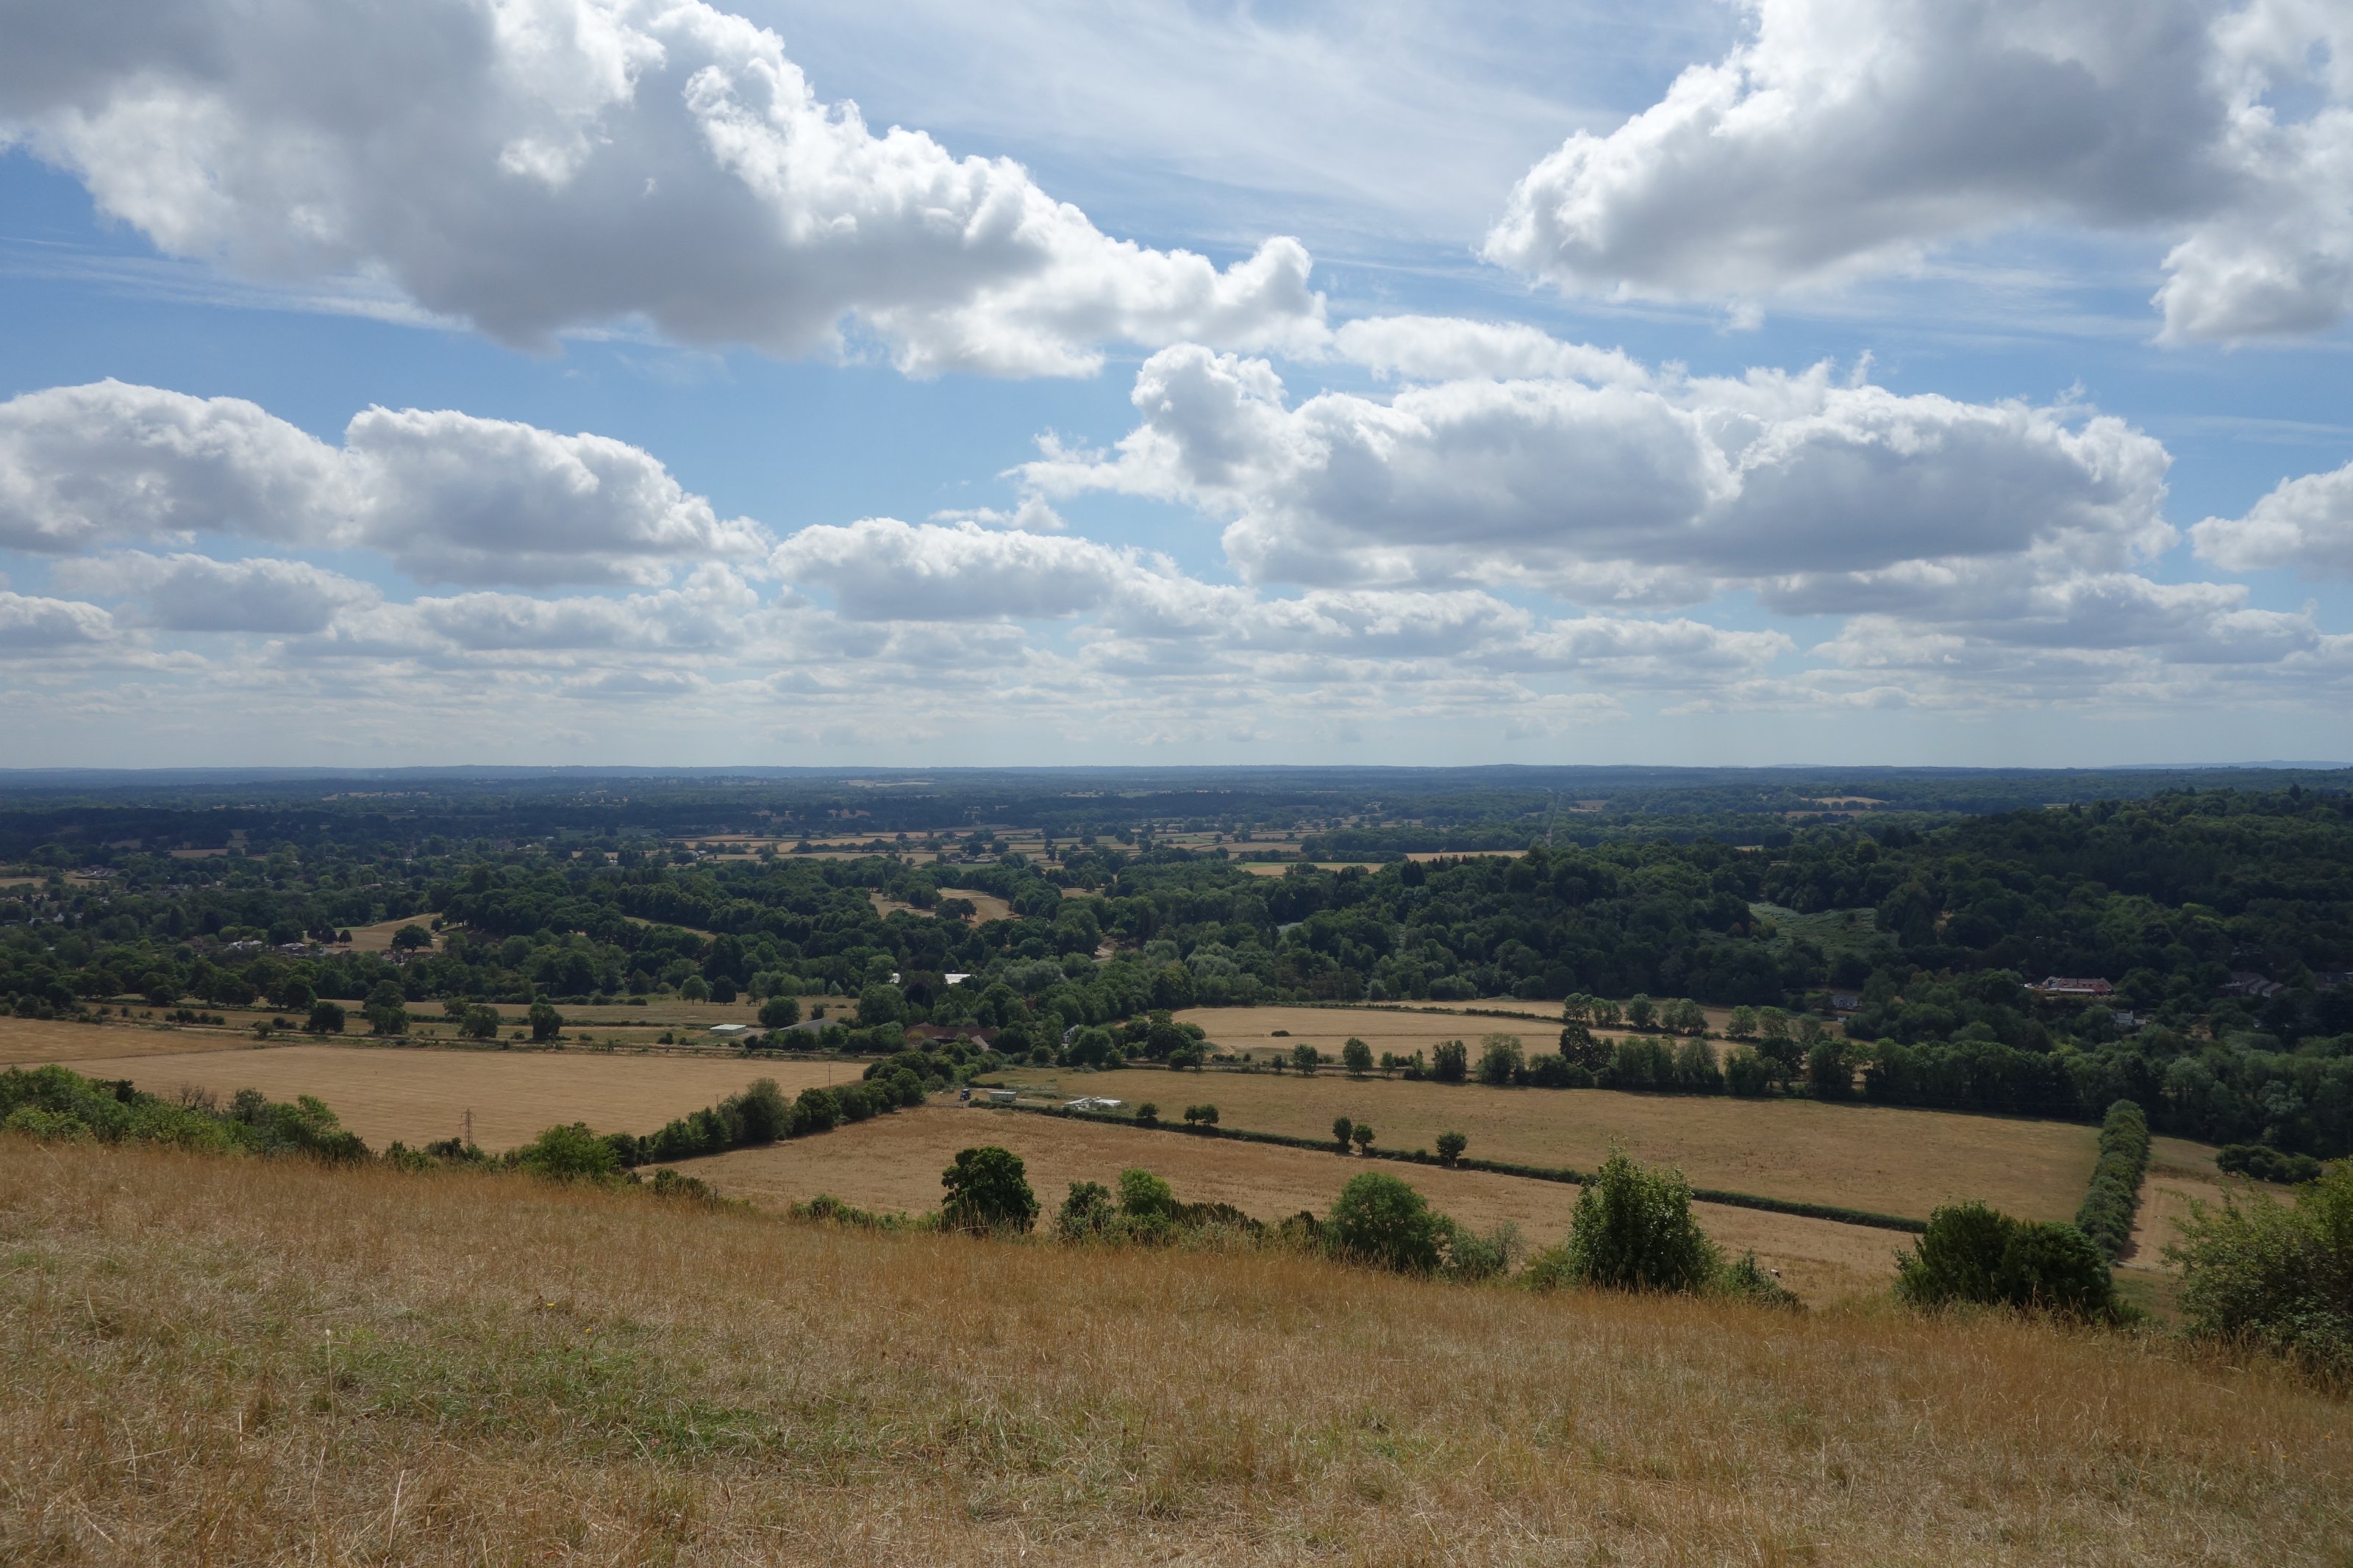 A view from Box Hill. Farm fields are visible in the middle distance, with a few cows that look the size of ants. beyond which the view is mostly trees with glimpses of fields between. The sky is blue where it isn't filled with fluffy white clouds.https://images.po-ru.com/original/box-hill-view.jpg 